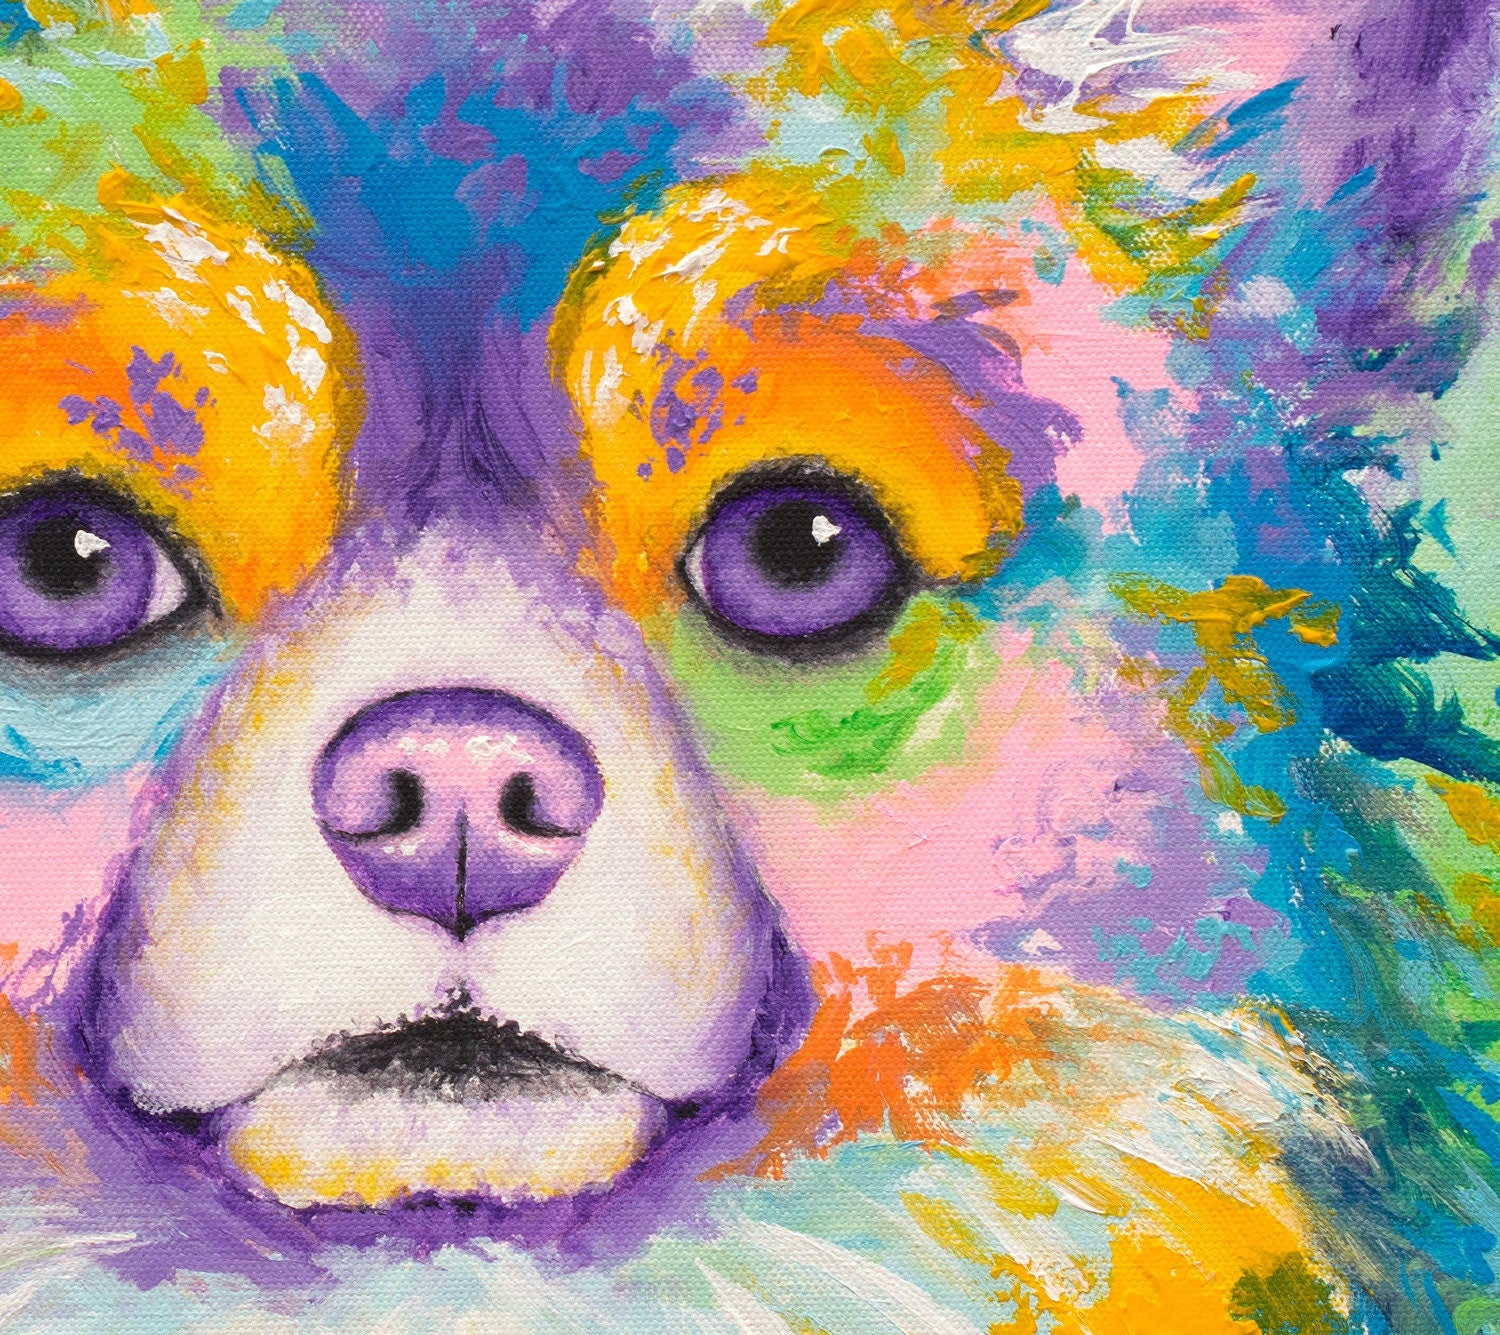 Long-Haired Chihuahua Art Print on Paper or Canvas of Dog Painting by Krystle Cole